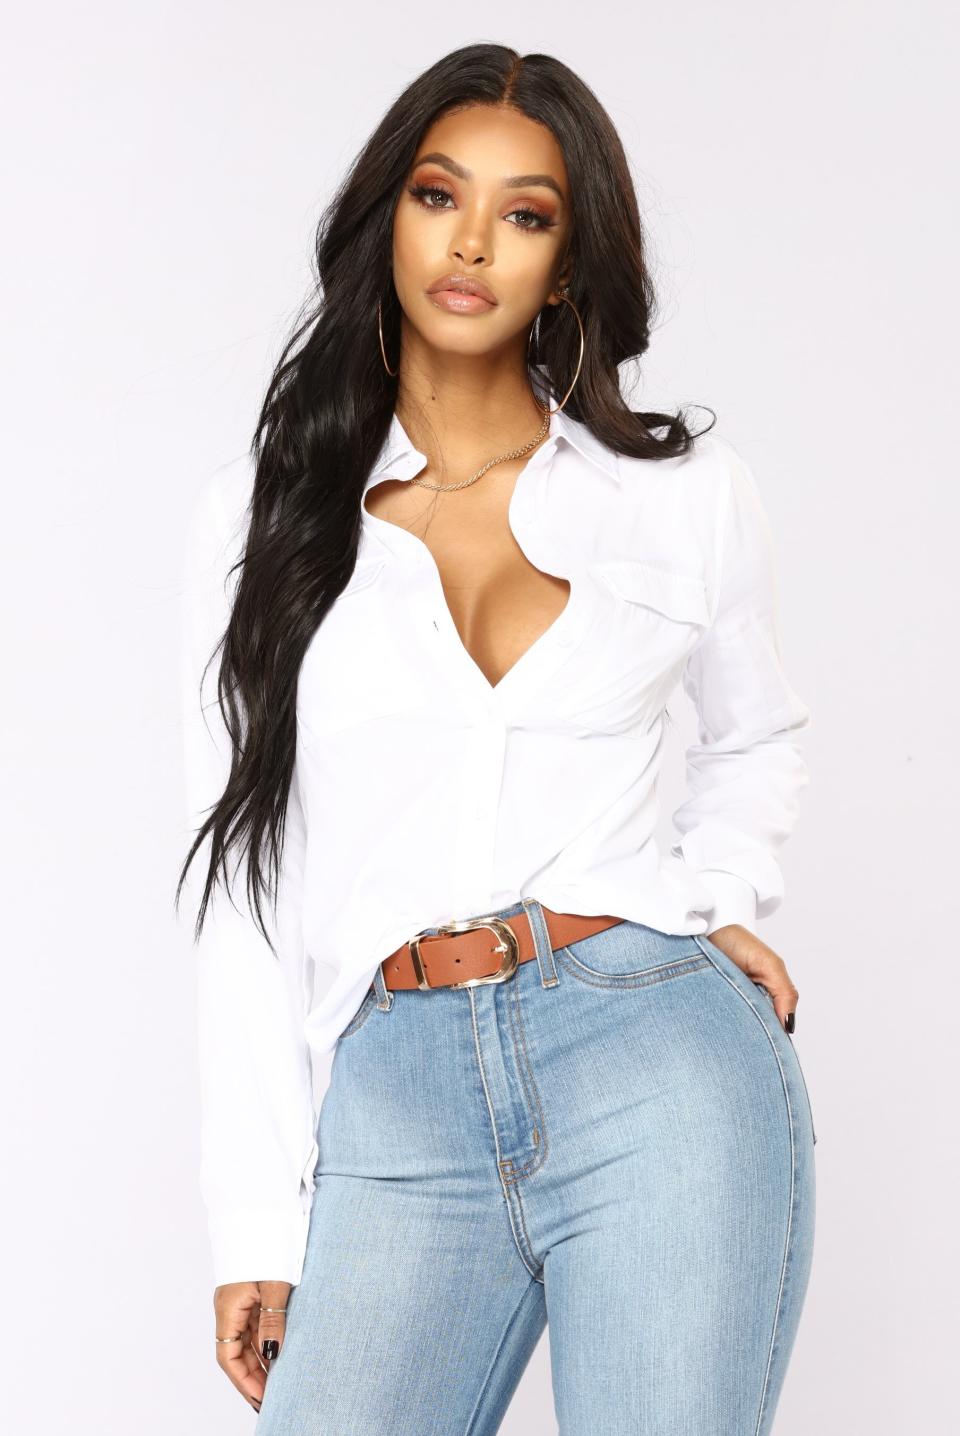 Crisp and white, try pairing this top with exciting prints and colors lurking within your wardrobe this spring.&nbsp;<br /><br /><strong><a href="https://www.fashionnova.com/products/you-better-work-shirt-ii-offwhite?refSrc=1321190817916&amp;nosto=productpage-nosto-3" target="_blank" rel="noopener noreferrer">Get the&nbsp;Fashion Nova You Better Work Shirt II, $24.99</a>.</strong>